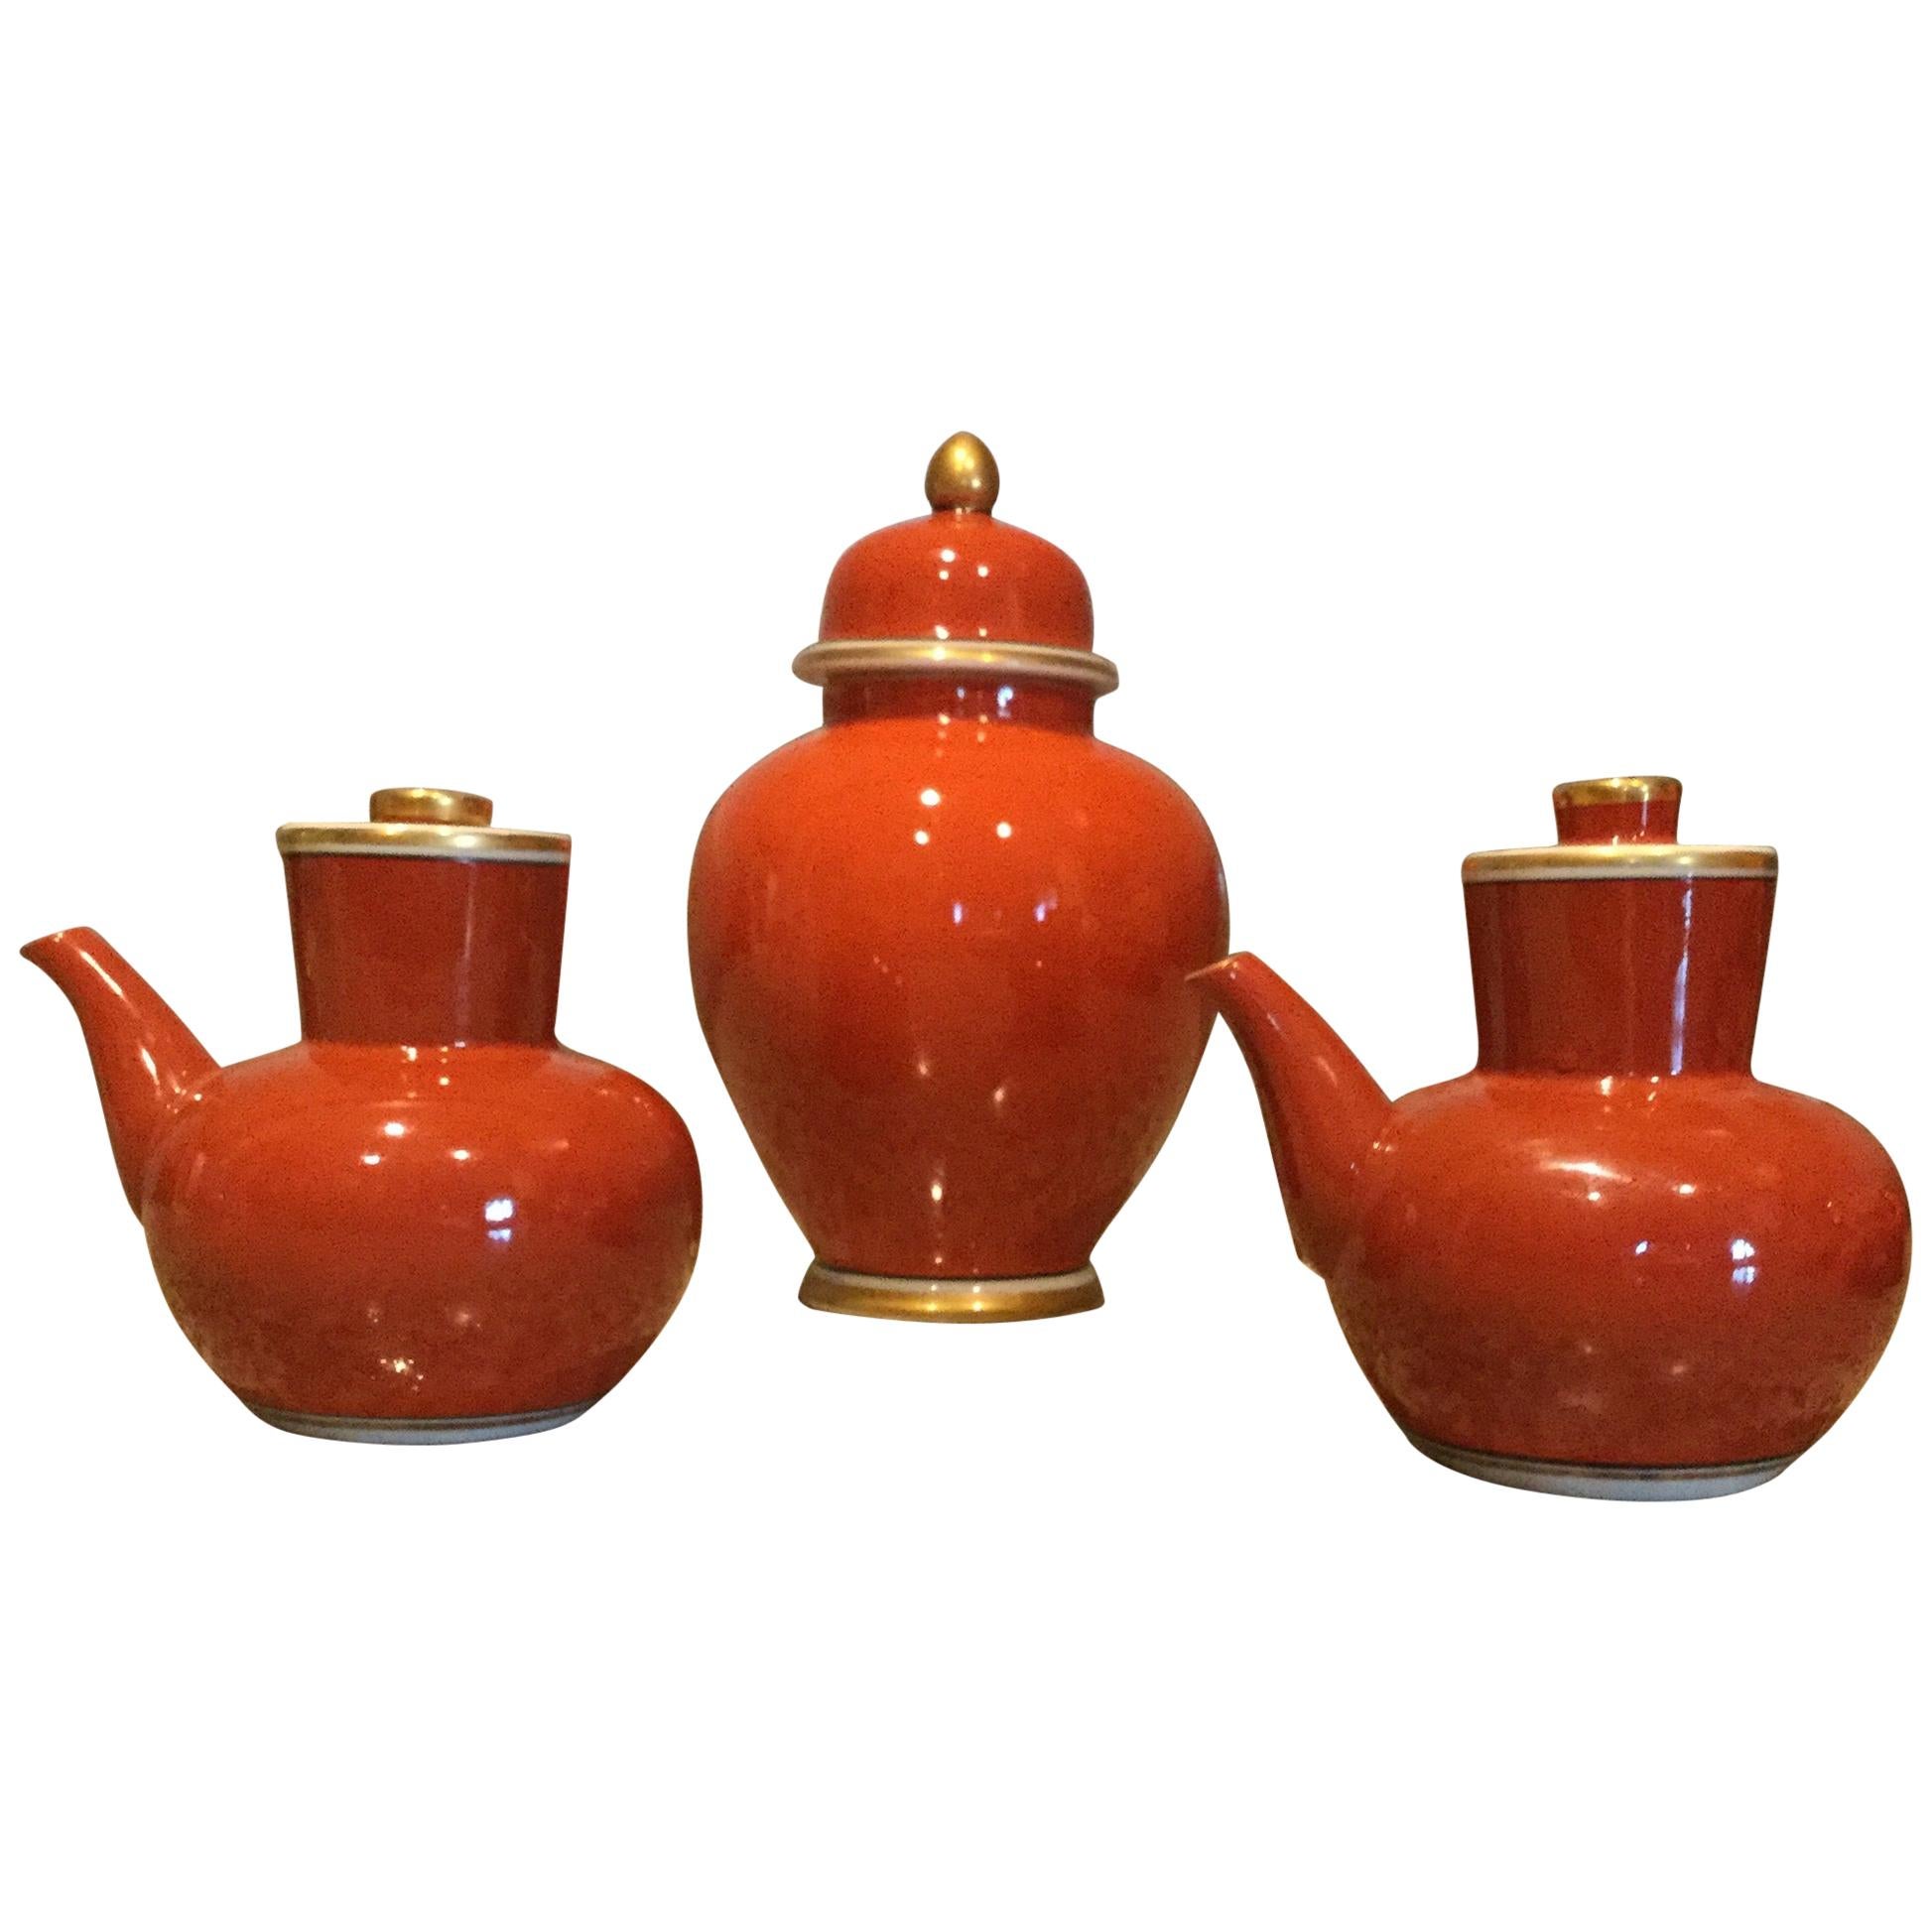 Fitz and Floyd Medaillon d’Or Pair of Cruets and Tea Ginger Jar, 1979